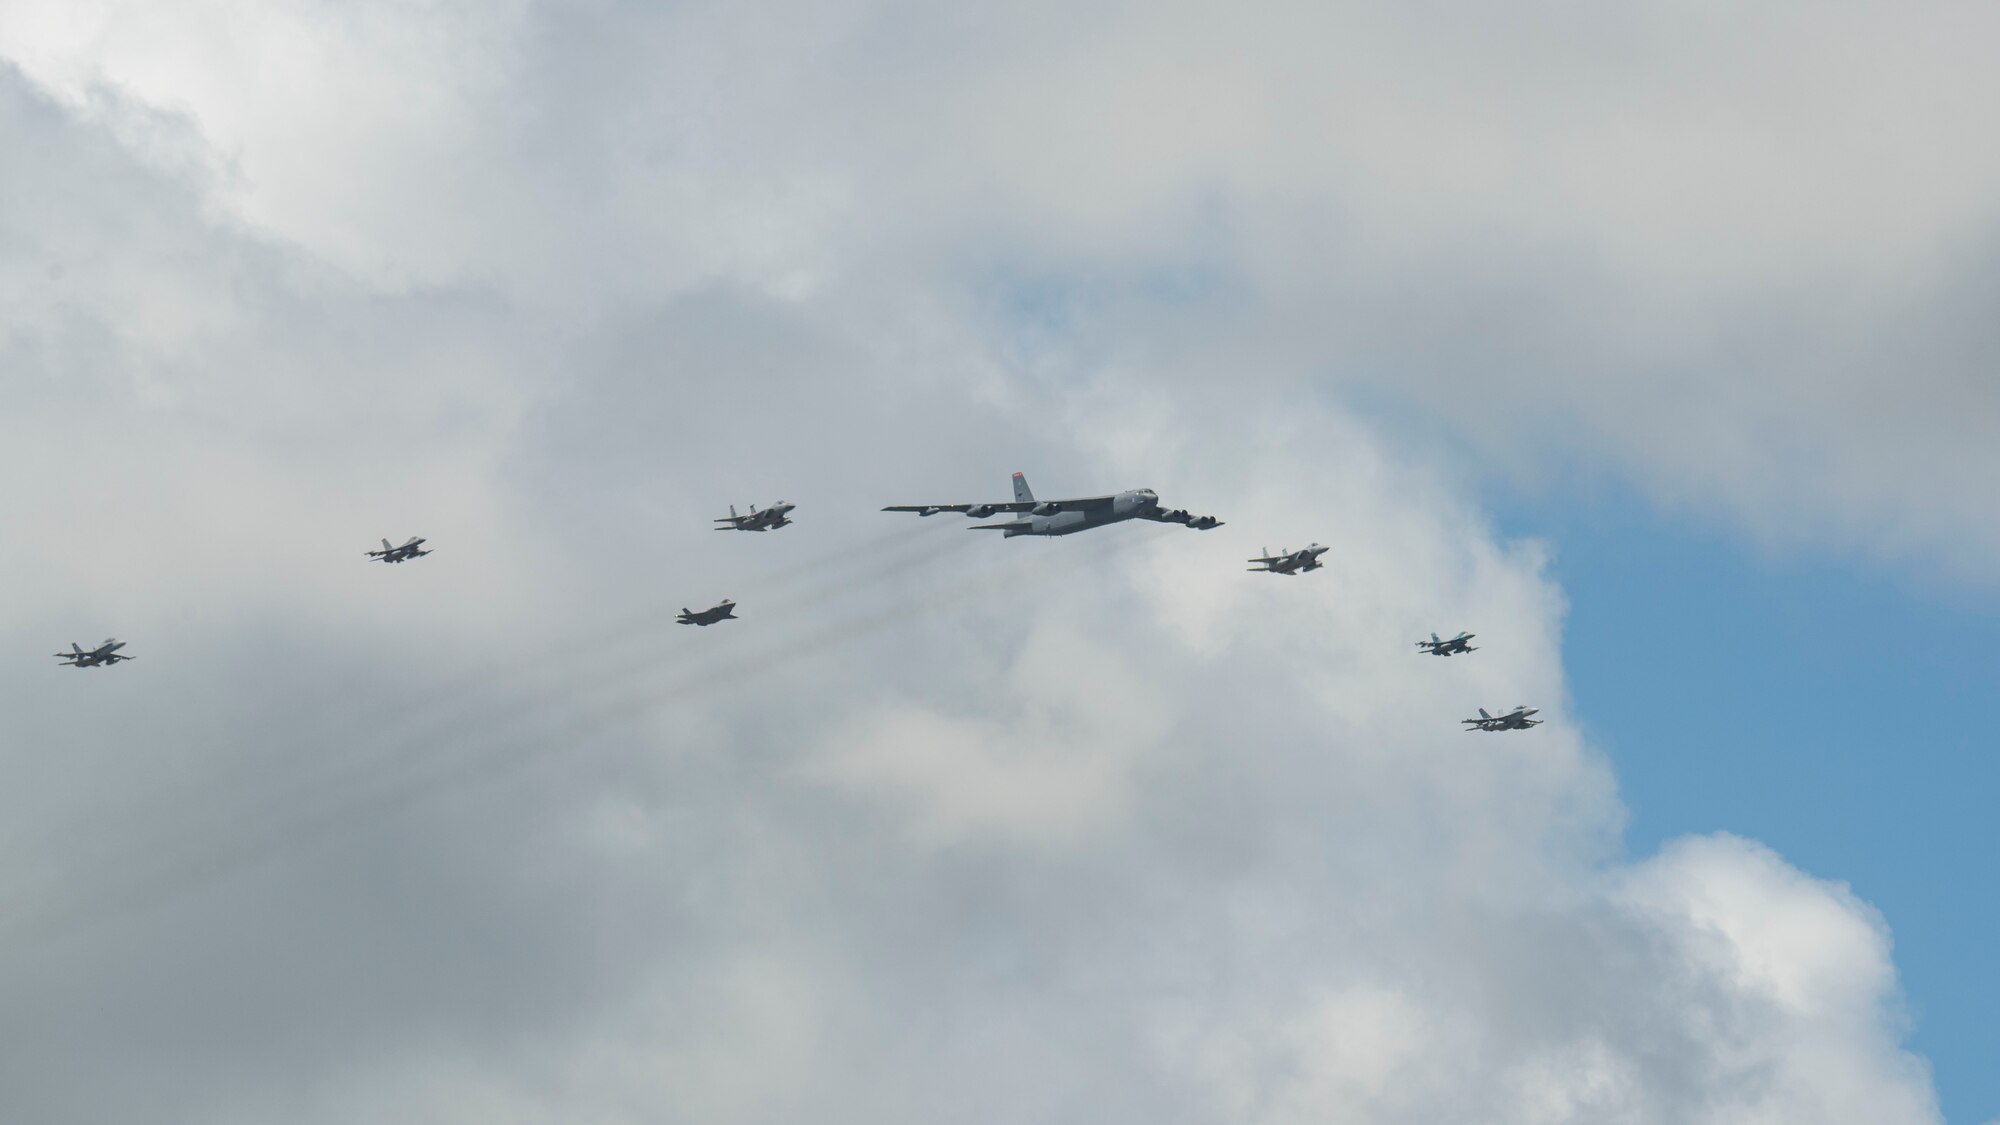 U.S. Air Force, Japan Air Self-Defense Force, or Koku-Jieitai, and Royal Australian Air Force aircraft fly in formation during exercise Cope North 21, at Andersen Air Force Base, Guam, Feb. 9, 2021.